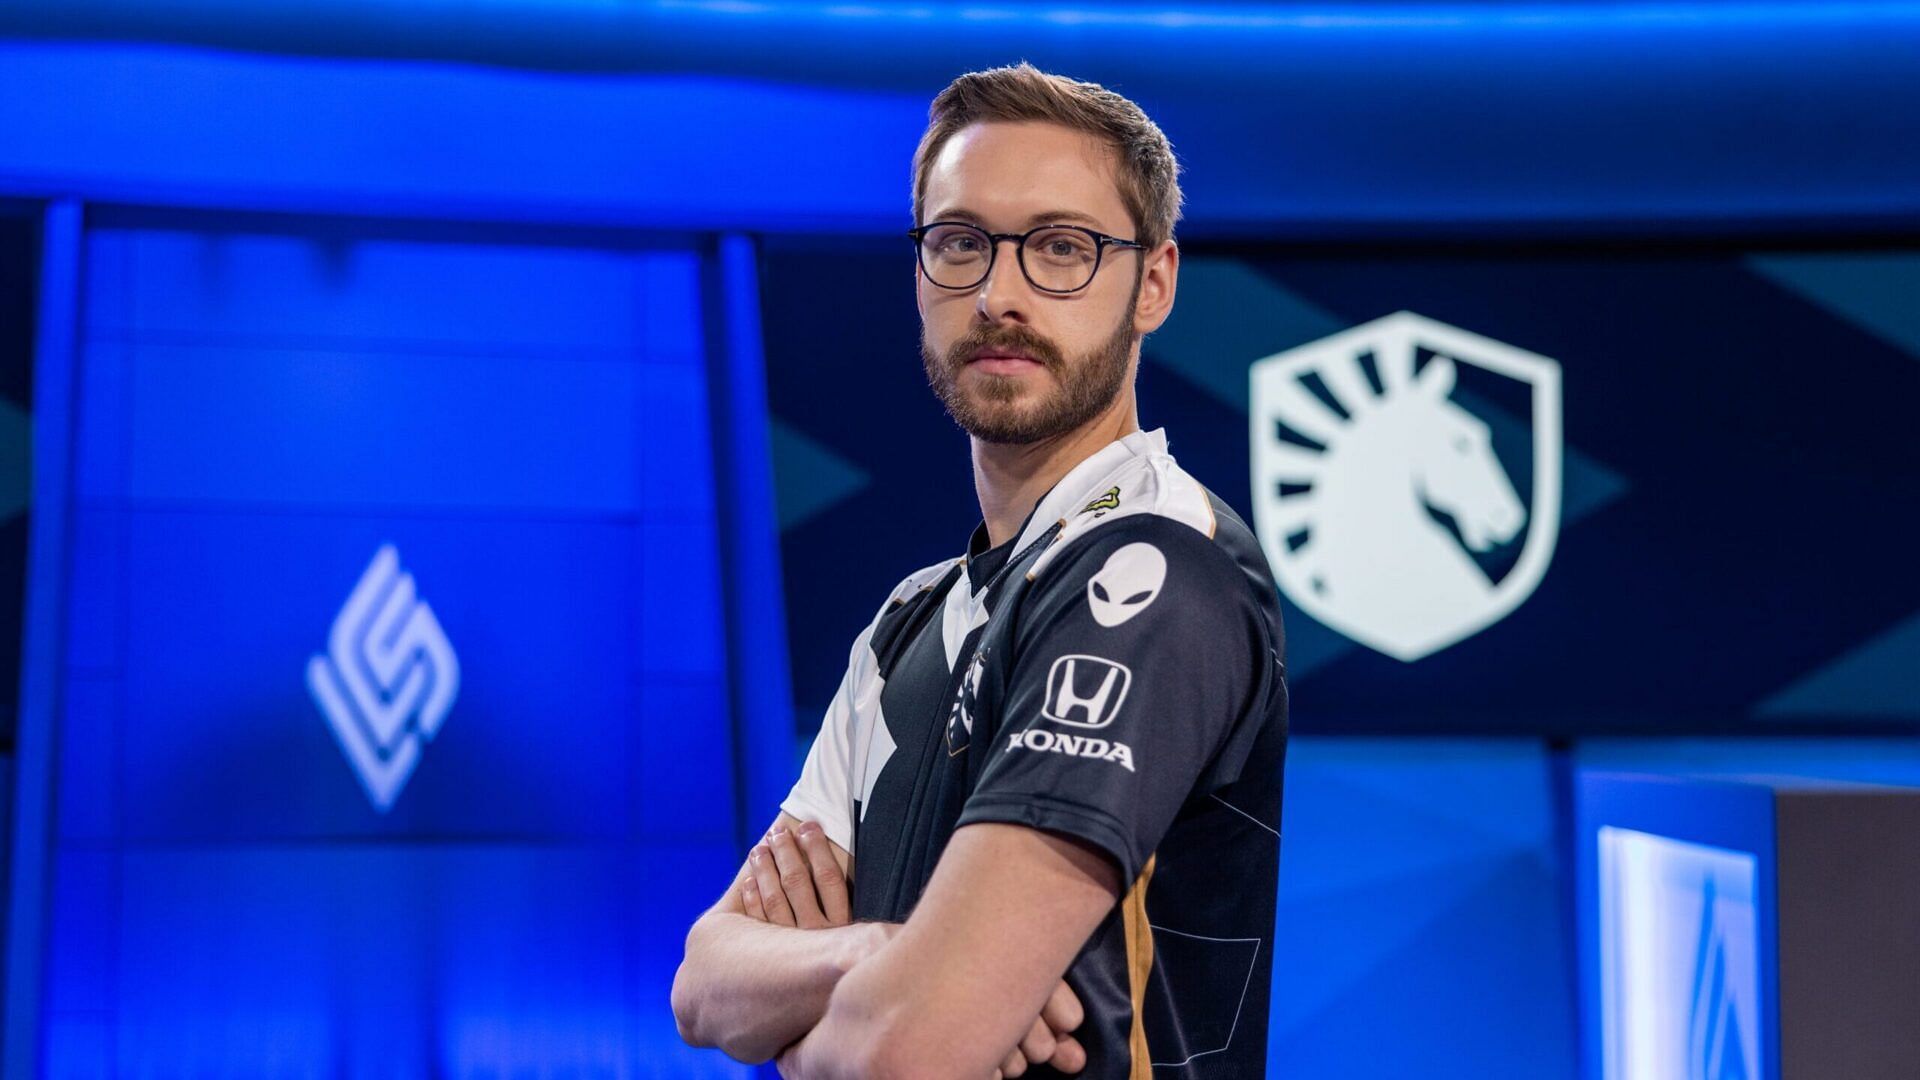 Team Liquid will benefit a lot from the leadership and experience of Bjergsen (Image via League of Legends)